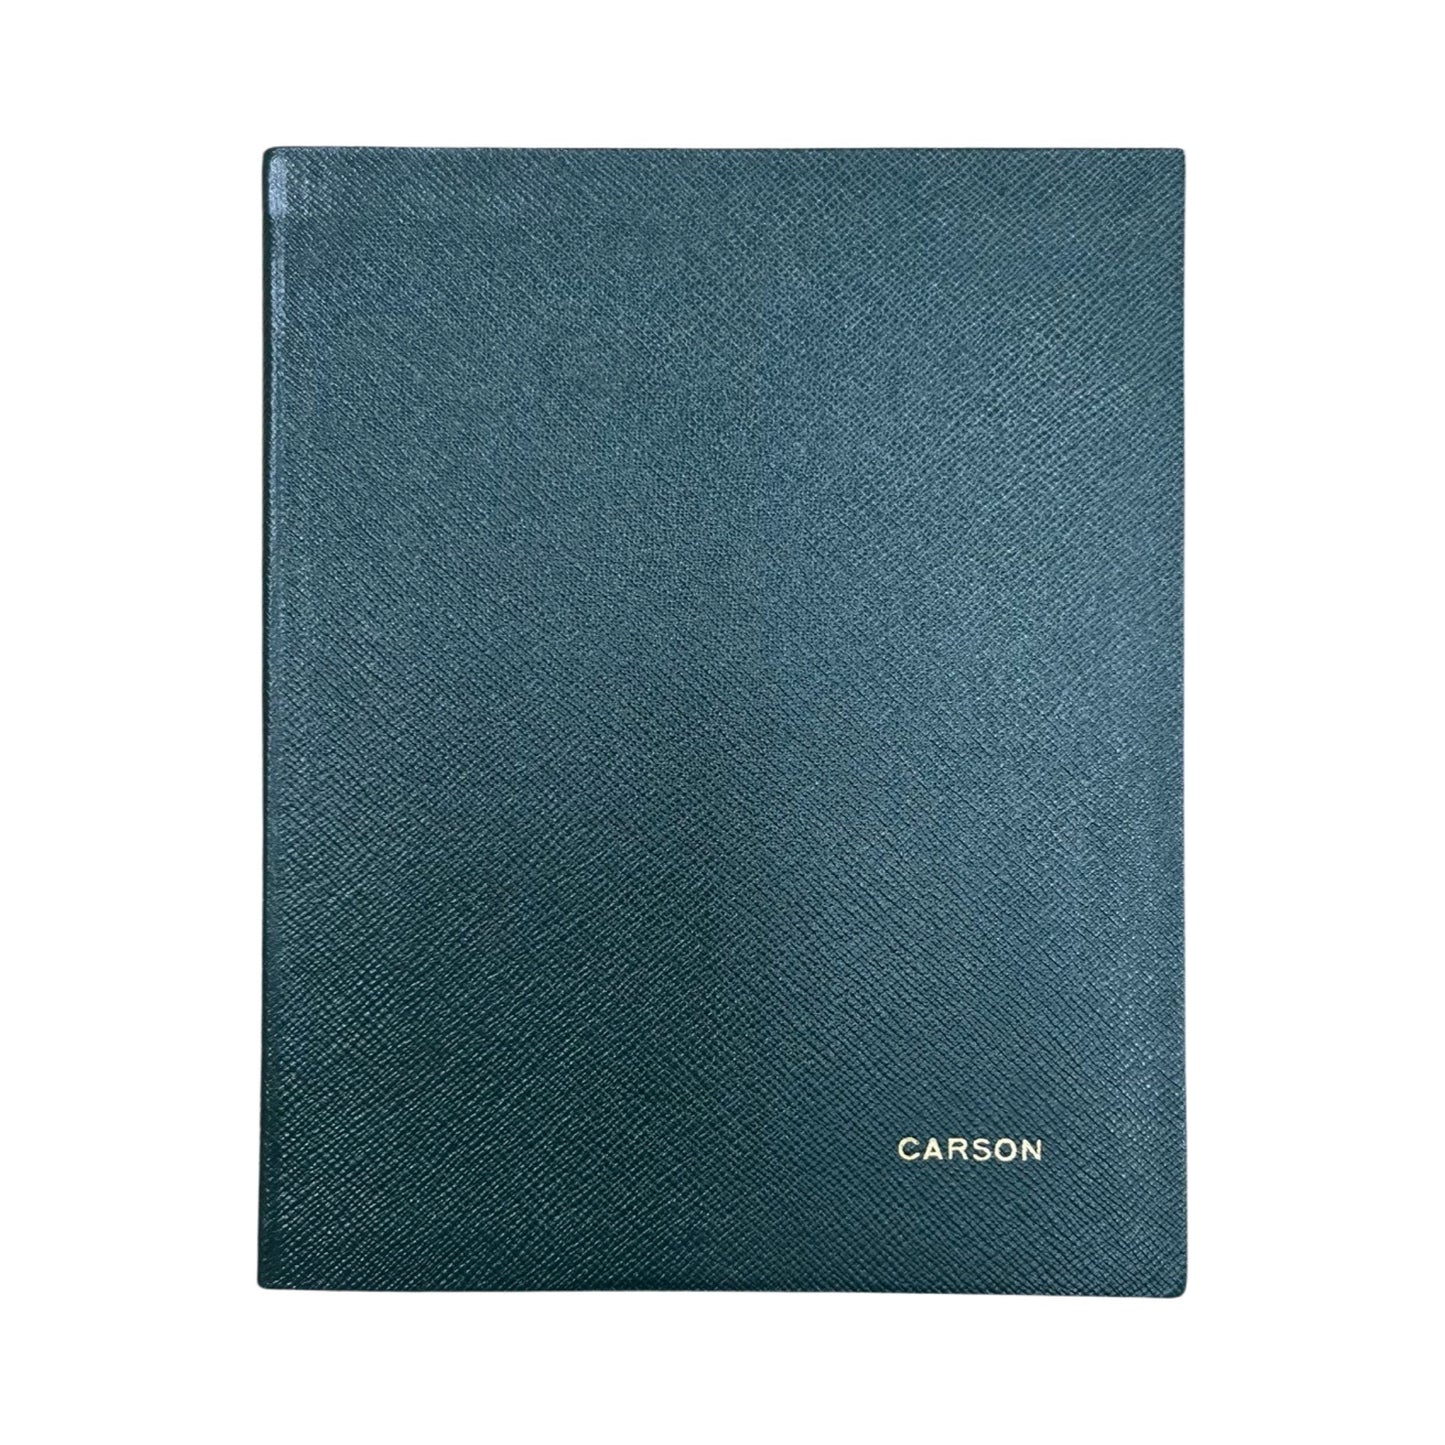 Leather Notebook | 8 x10" | Crossgrain Leather | Lined Pages | MM108L